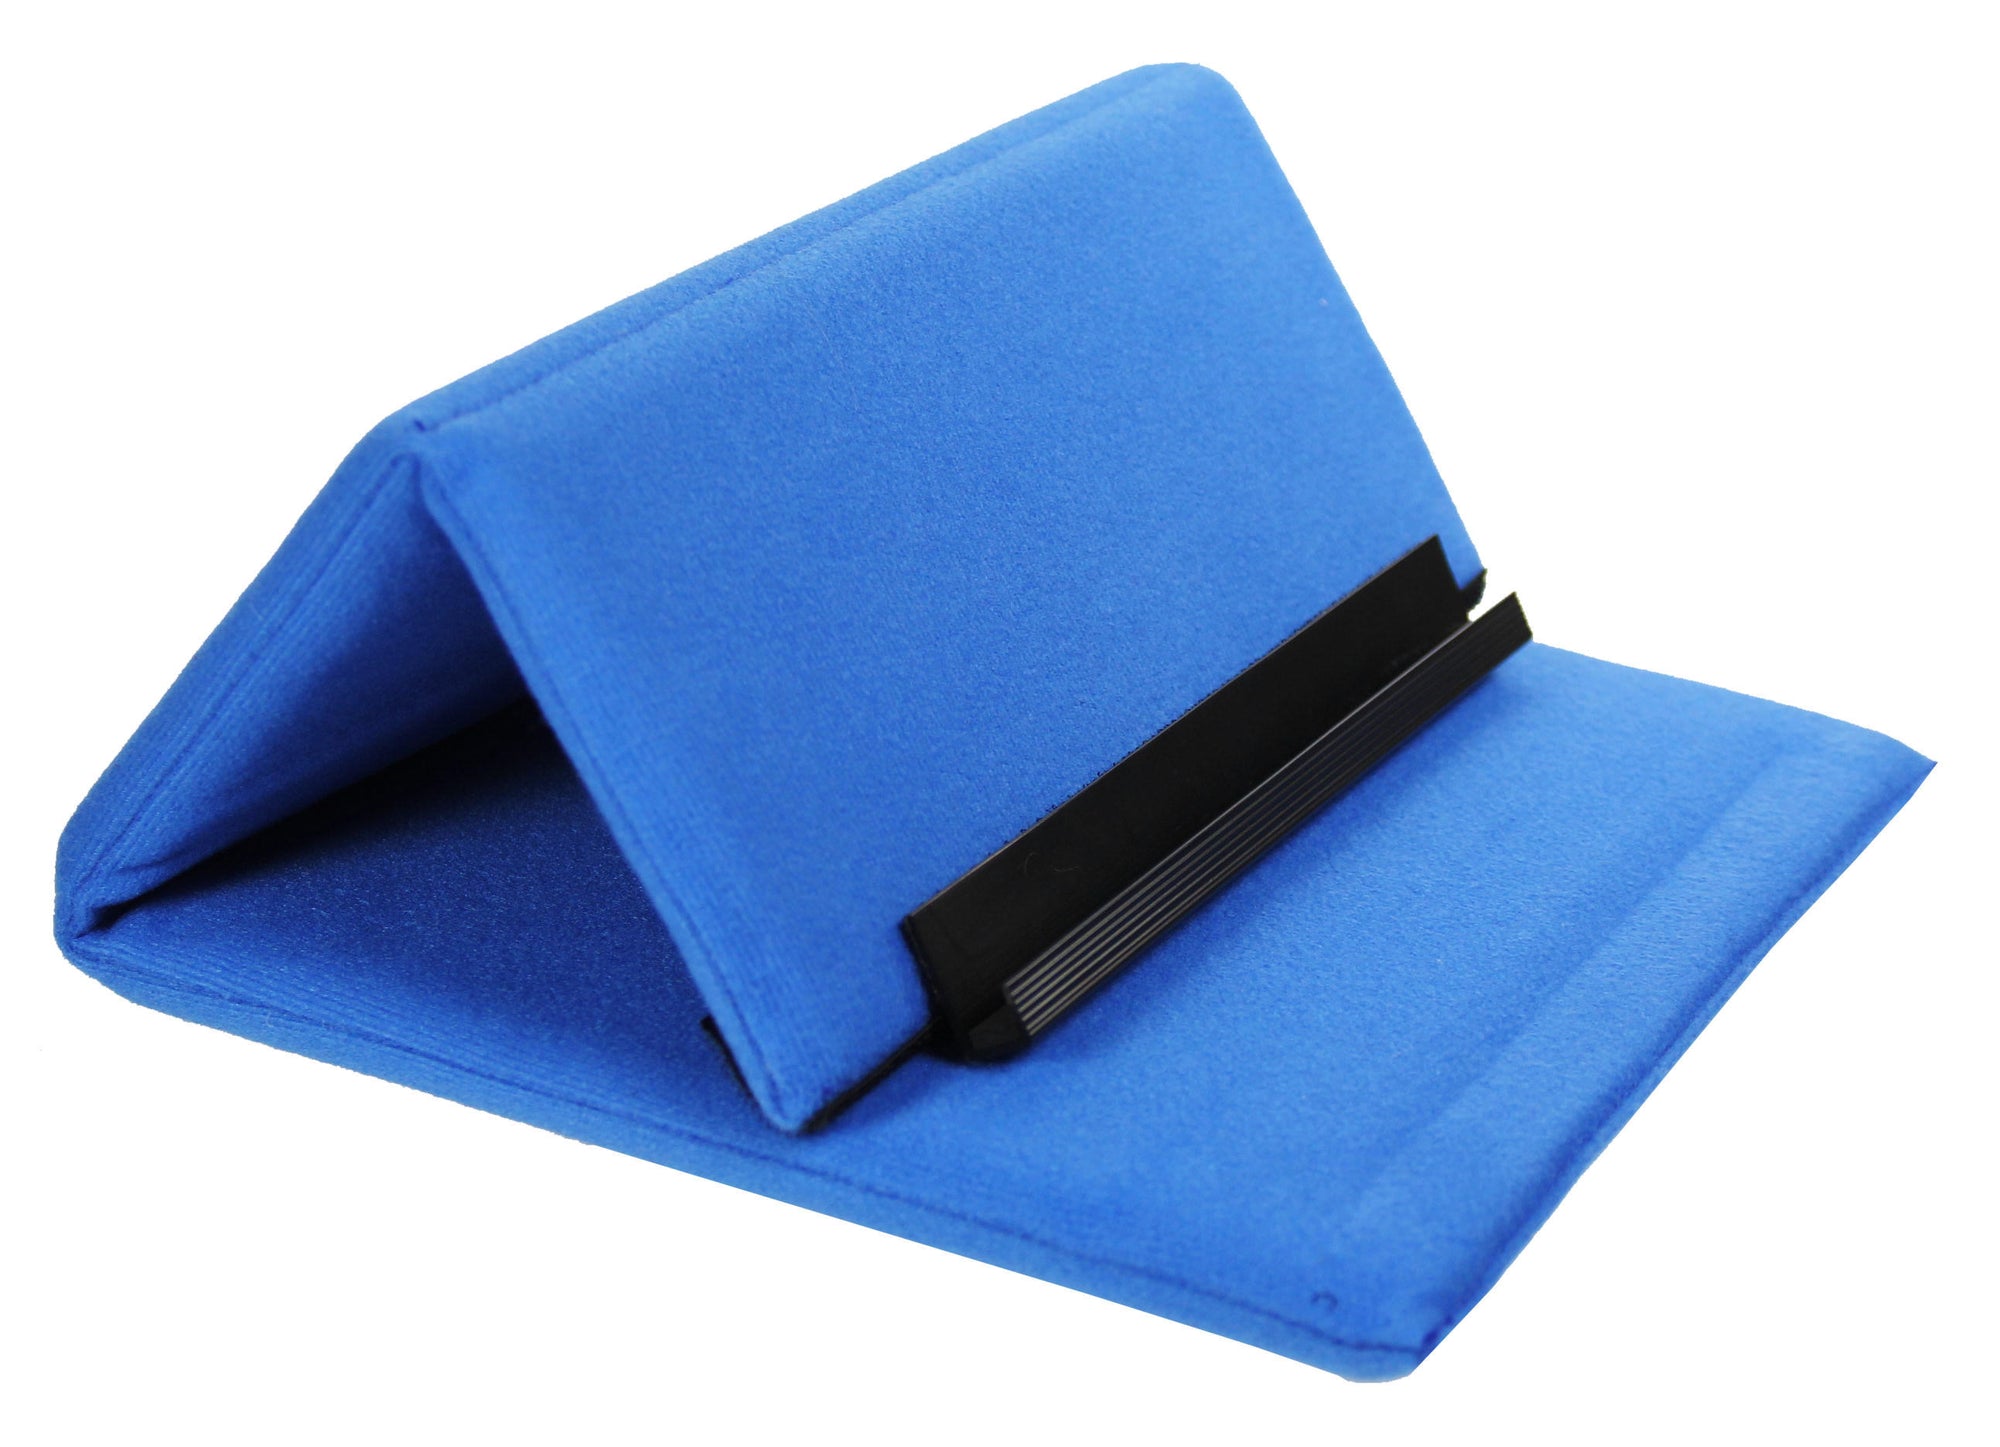 SALE: ALZO Multi-Angle Tablet Stand Lounger and Dock Cradle with Case for E-Readers and Phones